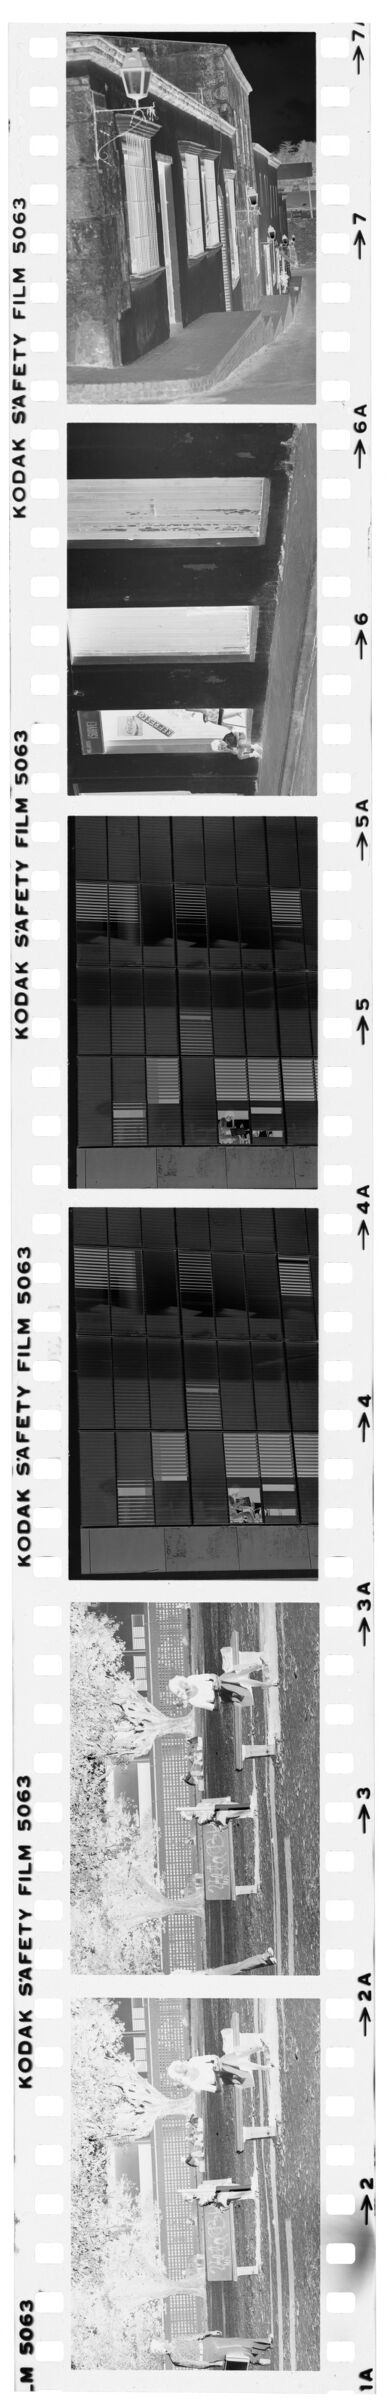 Untitled (Benches In Park; Windows Of Modern High-Rise Building; Views Of Street)